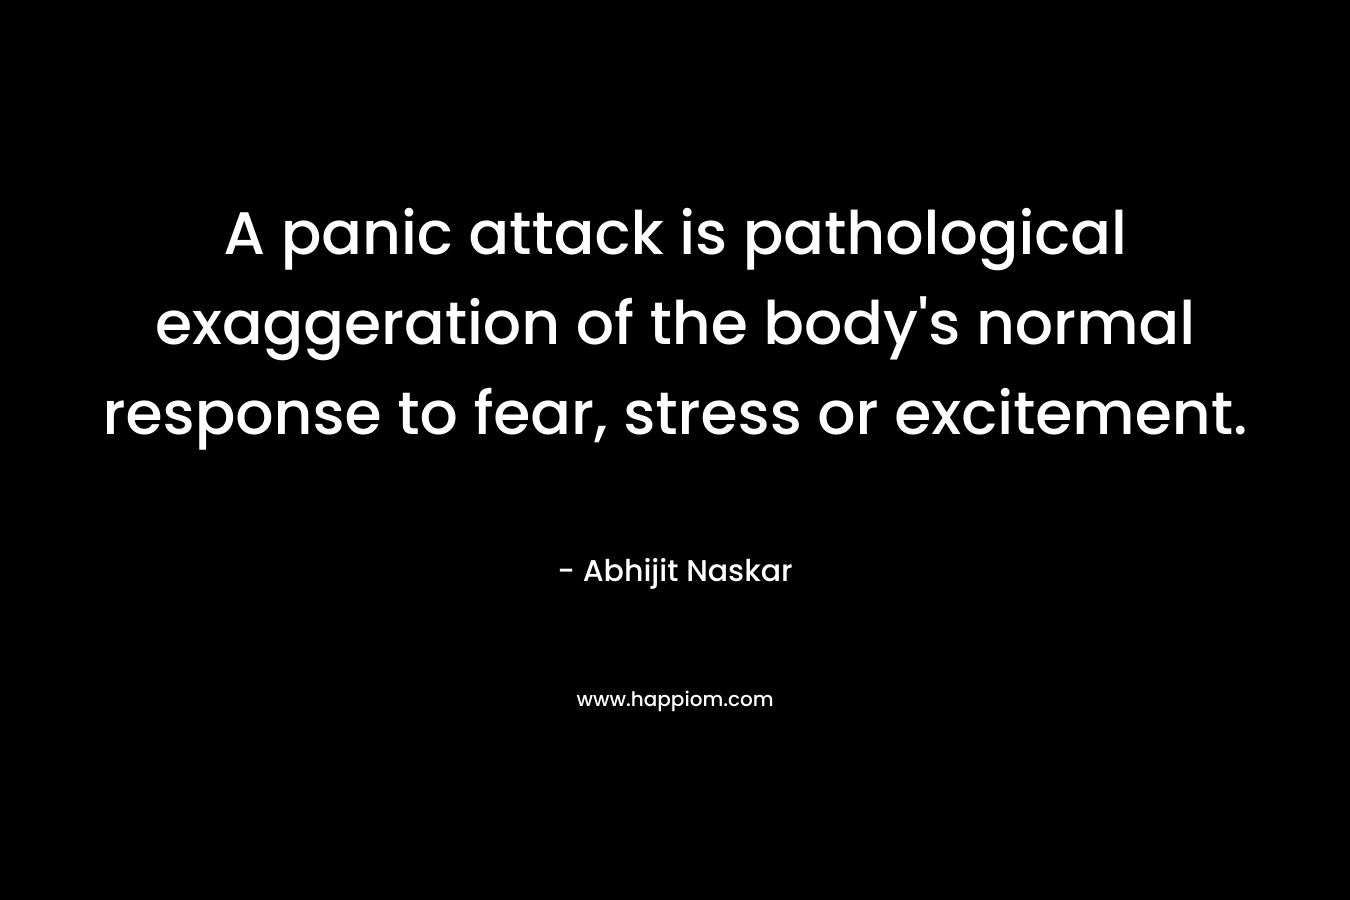 A panic attack is pathological exaggeration of the body's normal response to fear, stress or excitement.